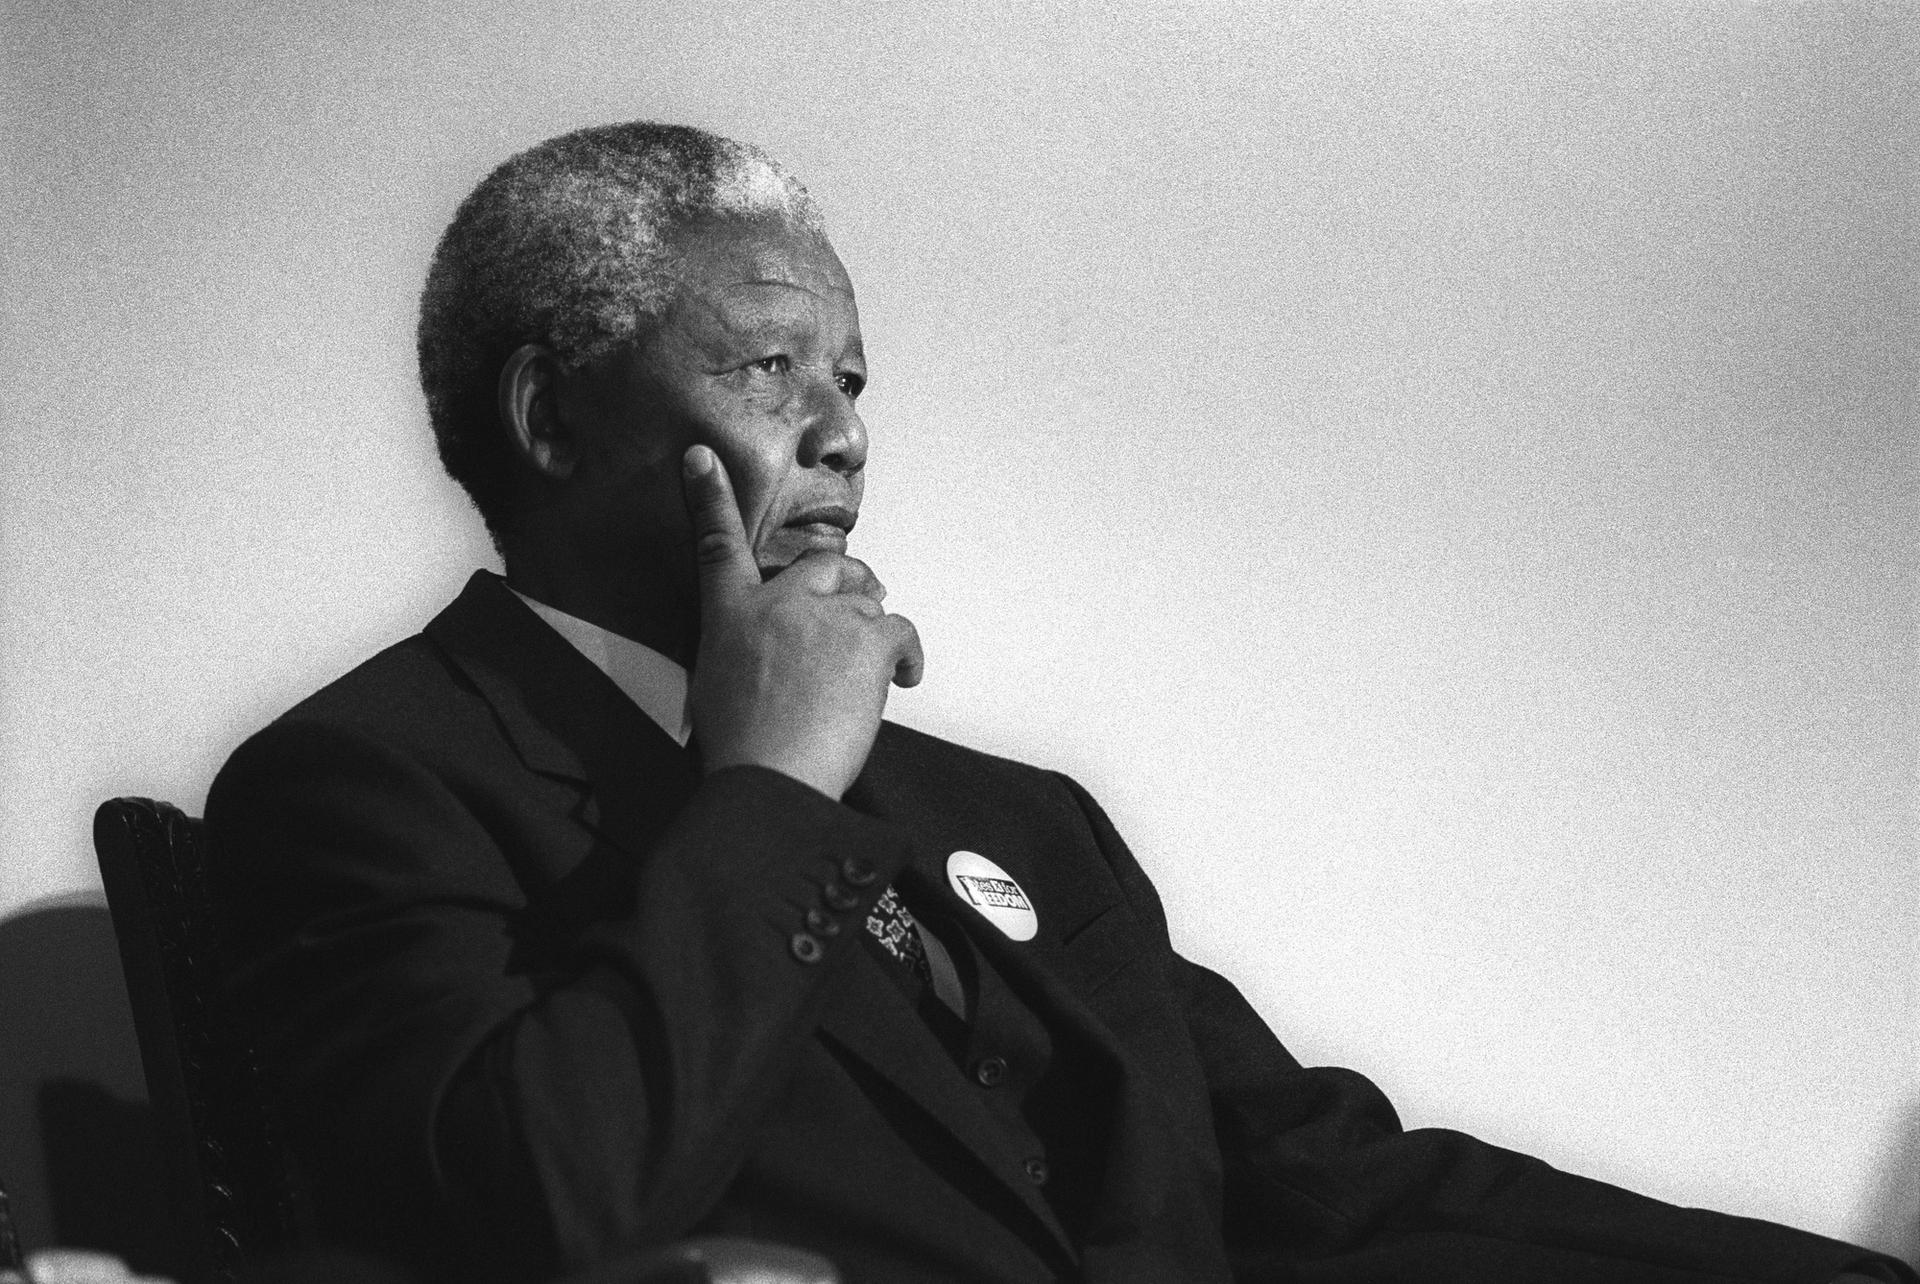 Nelson Mandela in Glasgow, Scotland, on 9th October 1993. Mandela was in Glasgow to receive the 'Freedom of the City' honour. Photo by Jeremy Sutton-Hibbert, Alamy Stock Photo